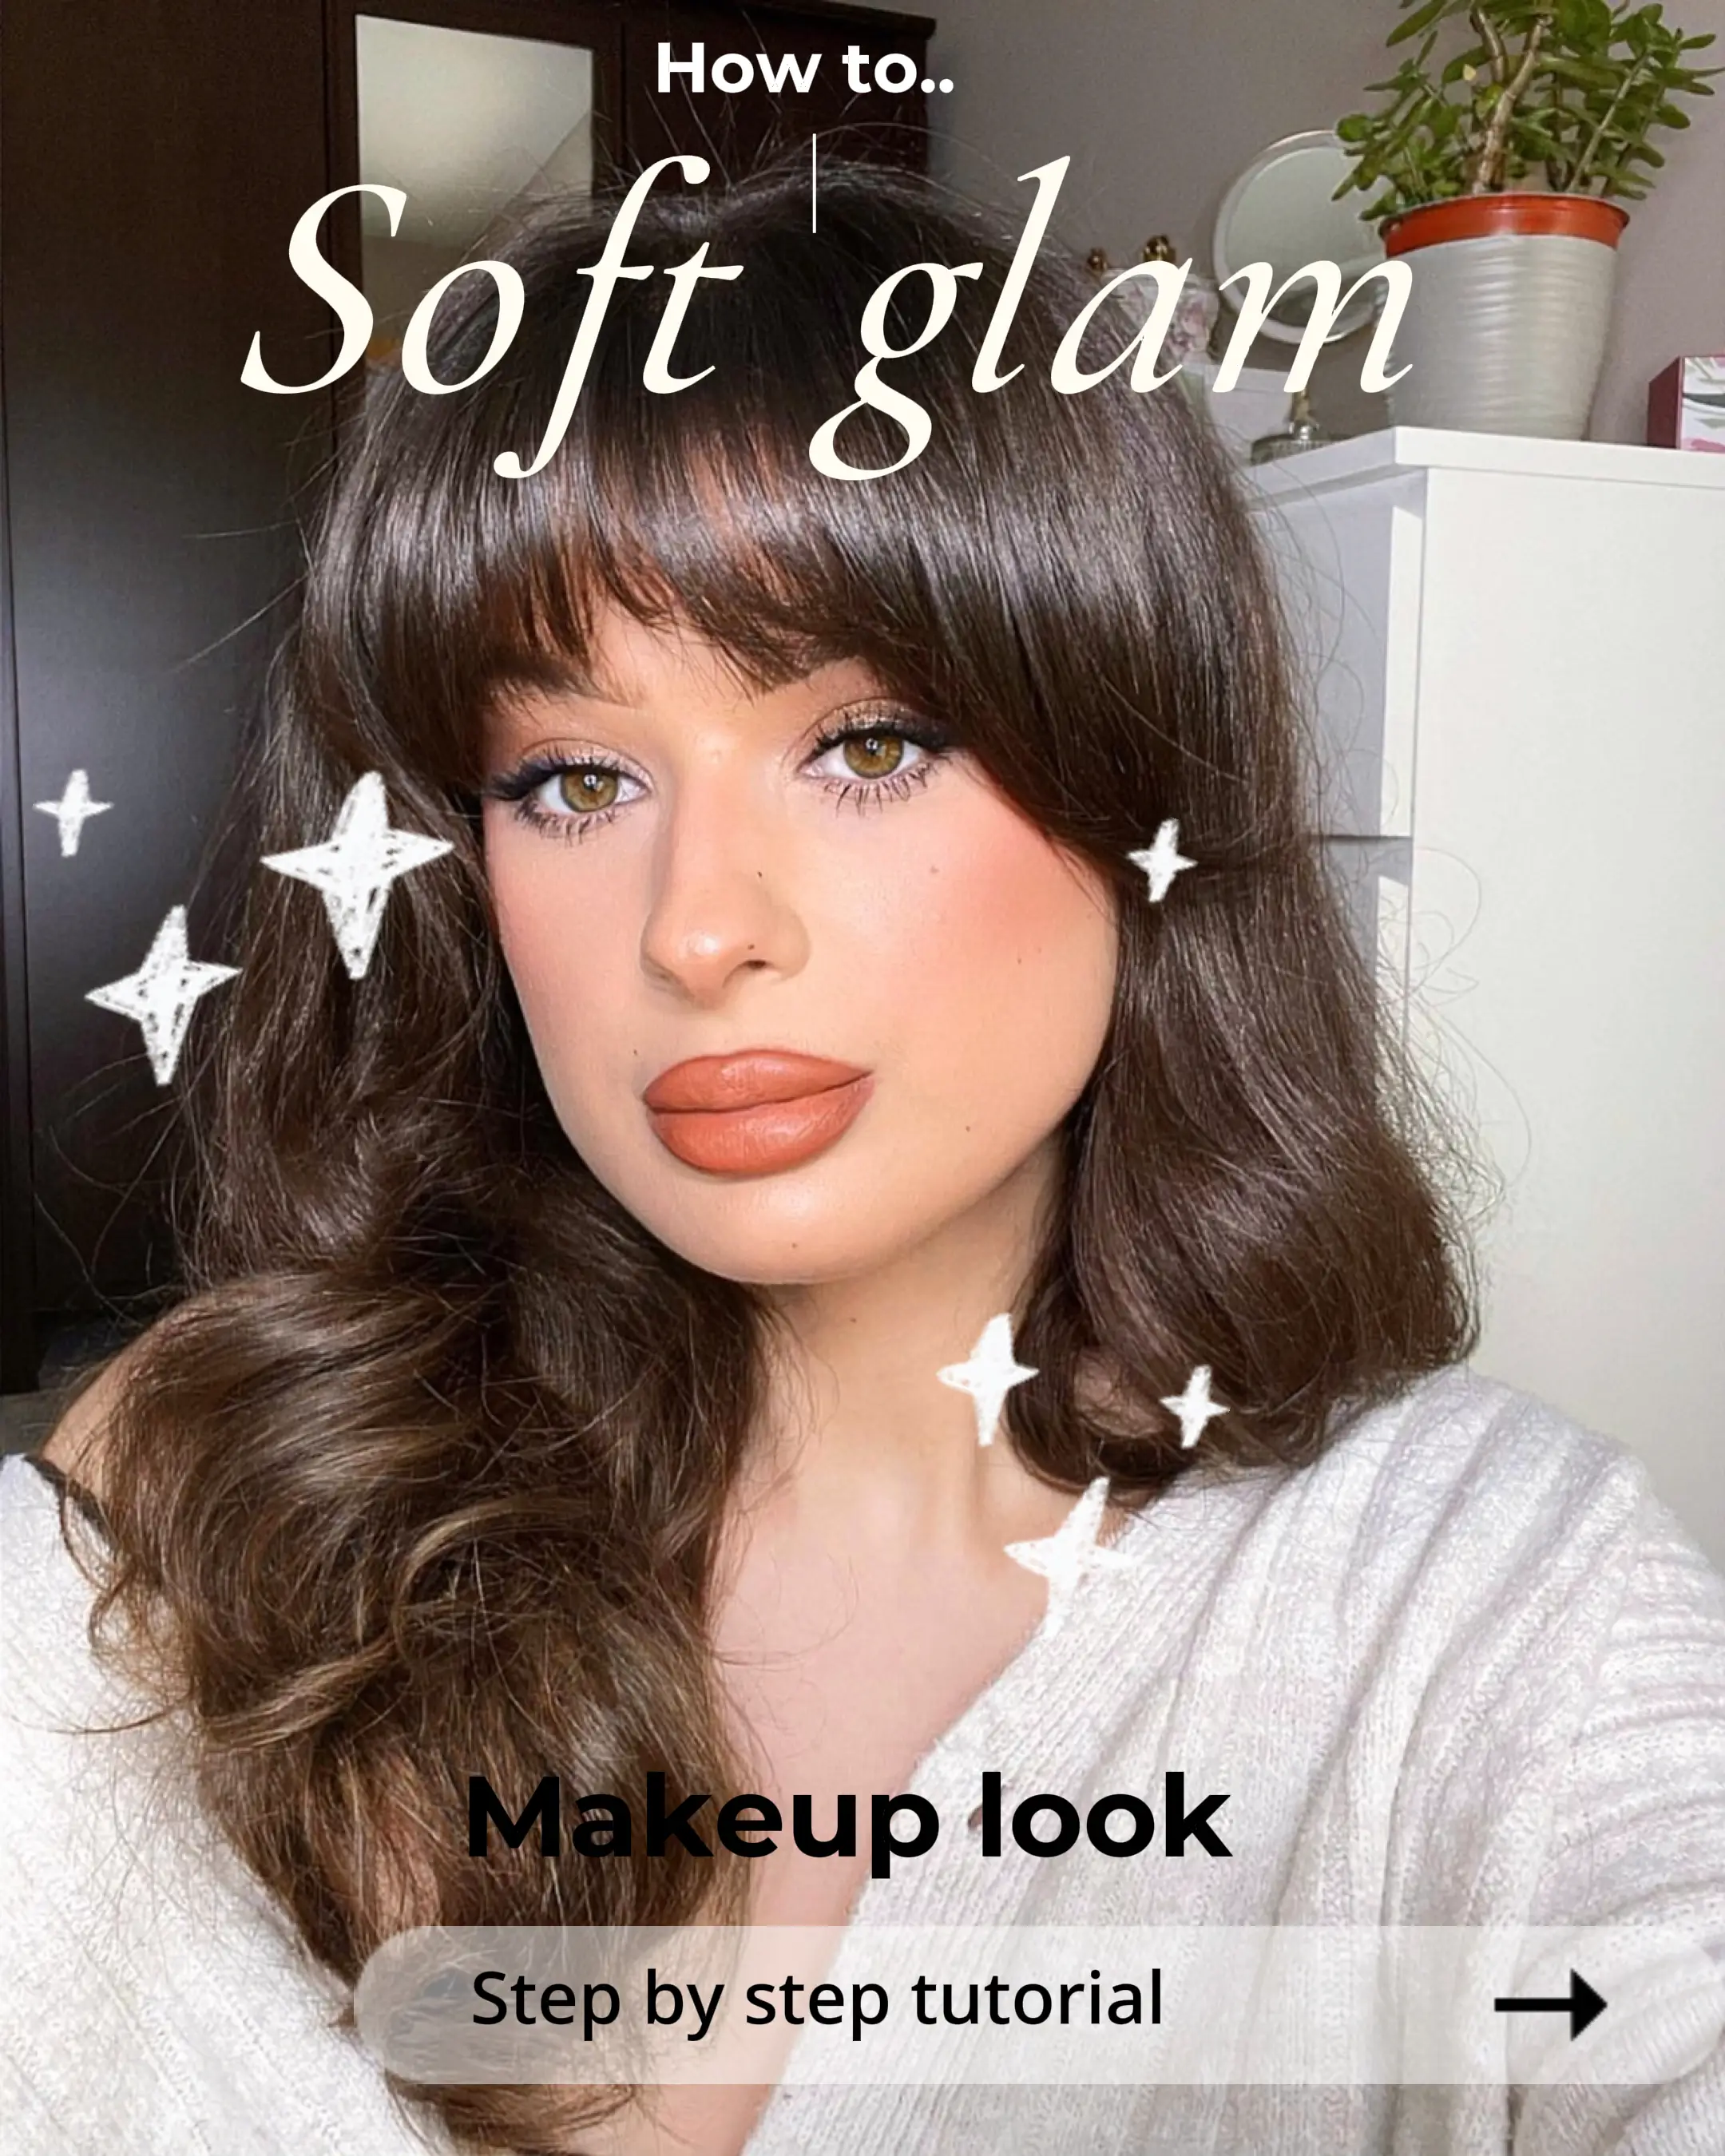 SOFT GLAM FOE EVERY OCCASION 💕, Video published by olobeymua